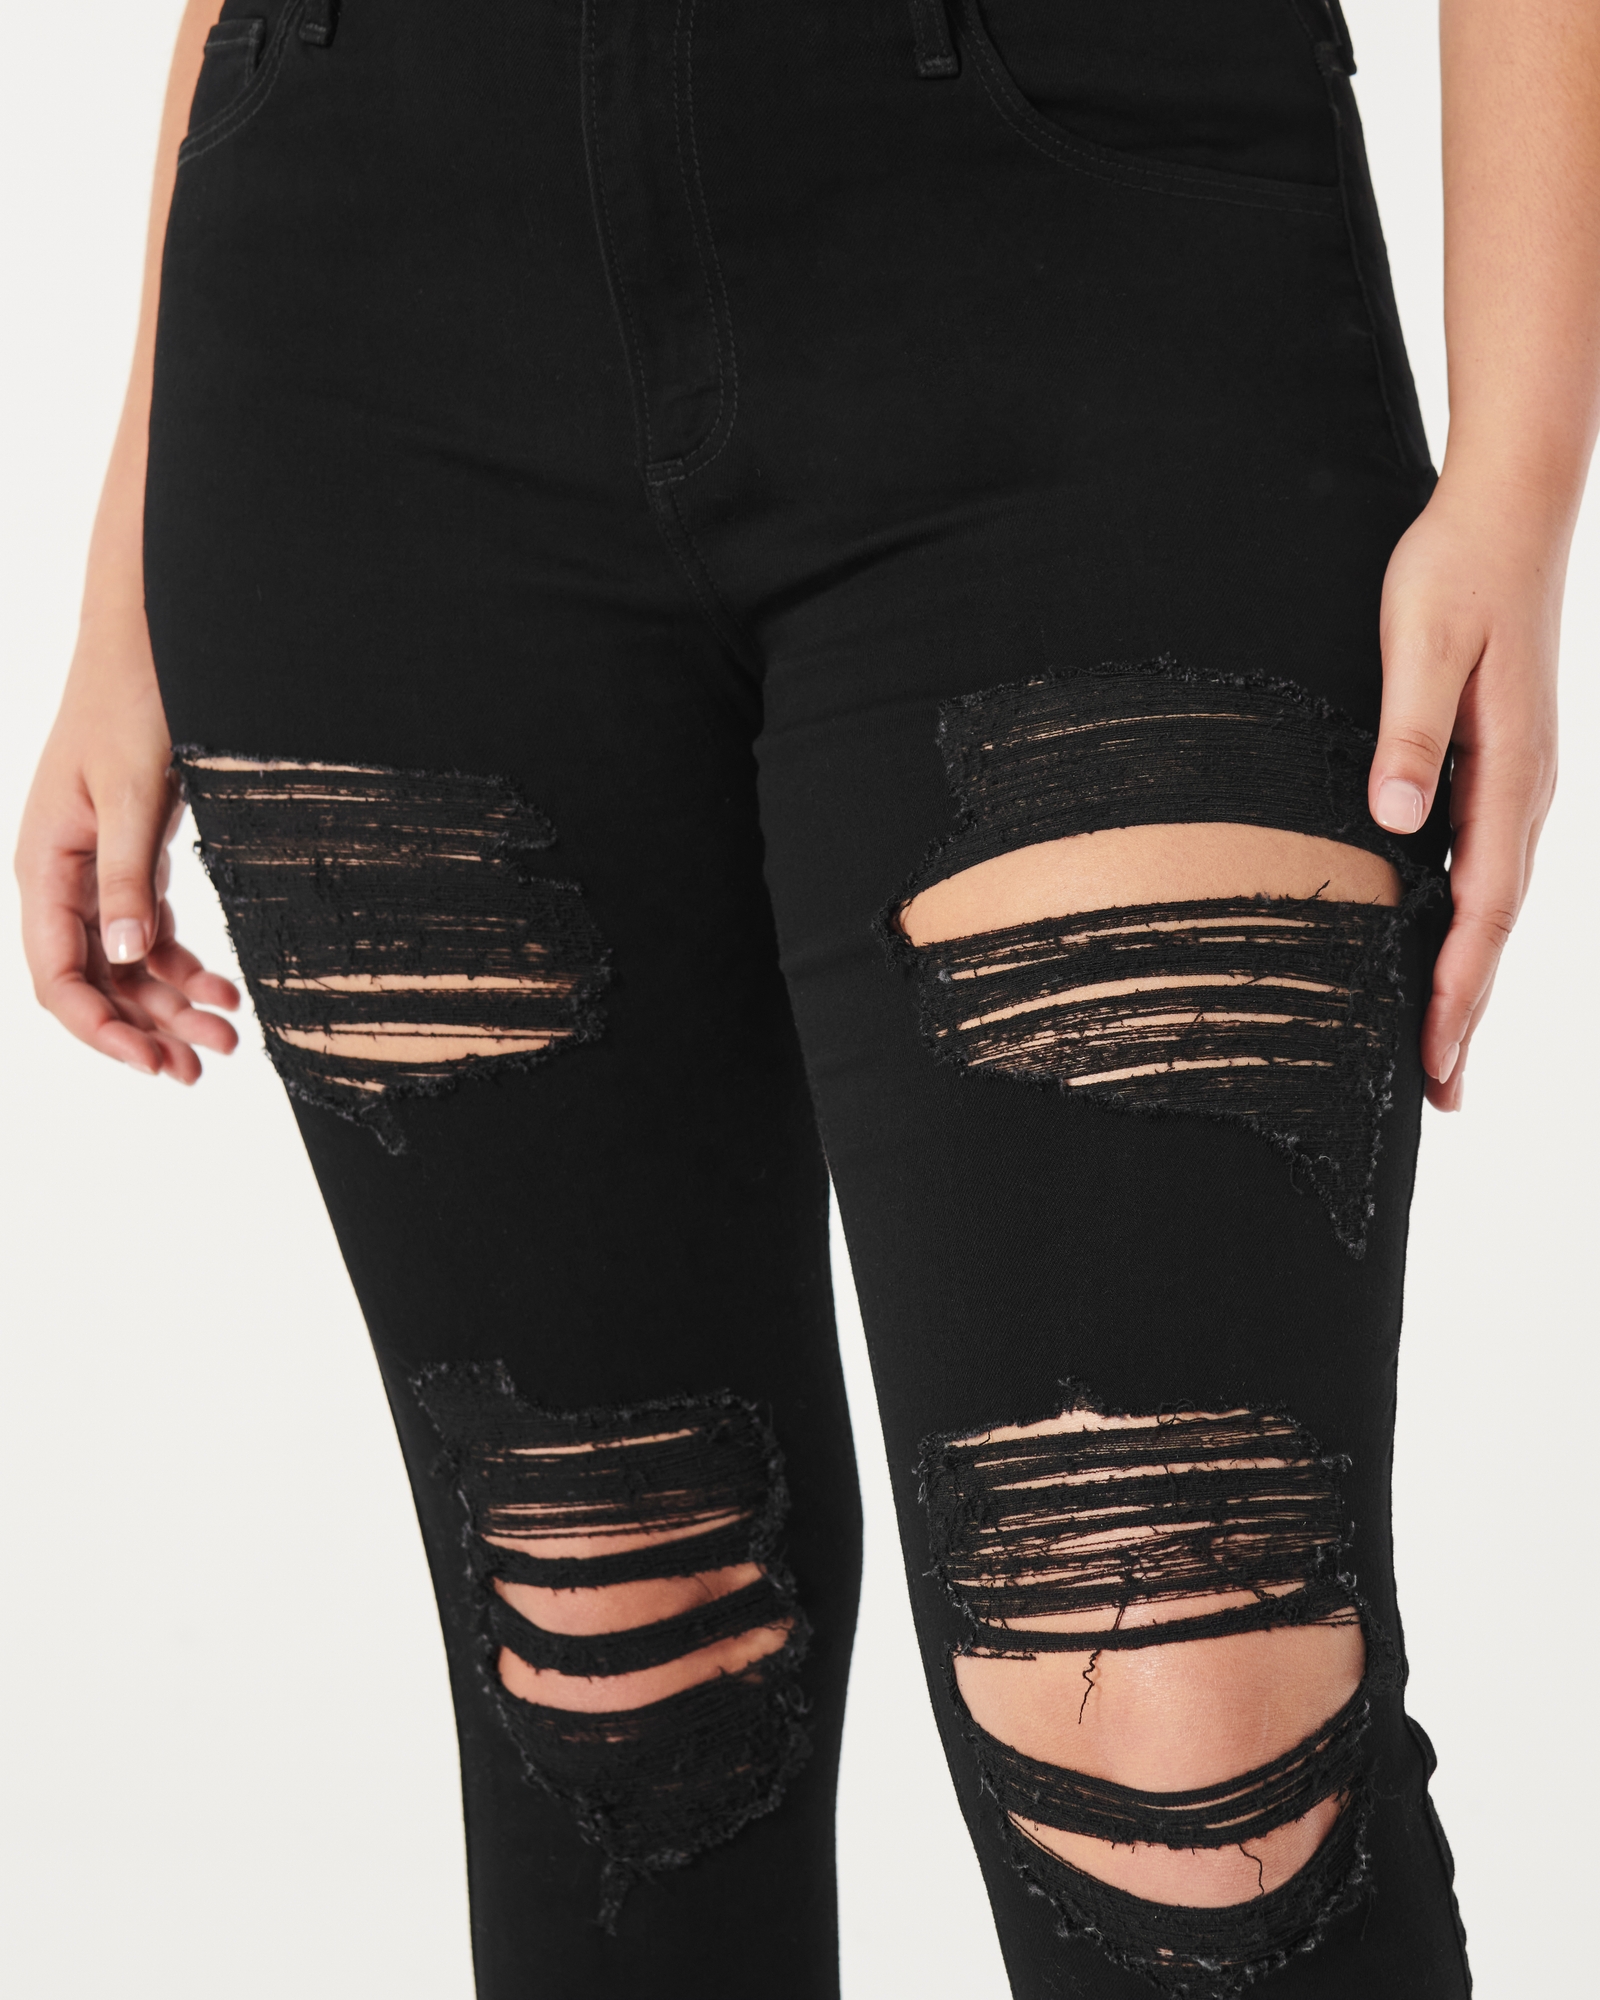 Women's Curvy High-Rise Ripped Black Super Skinny Jeans, Women's Clearance